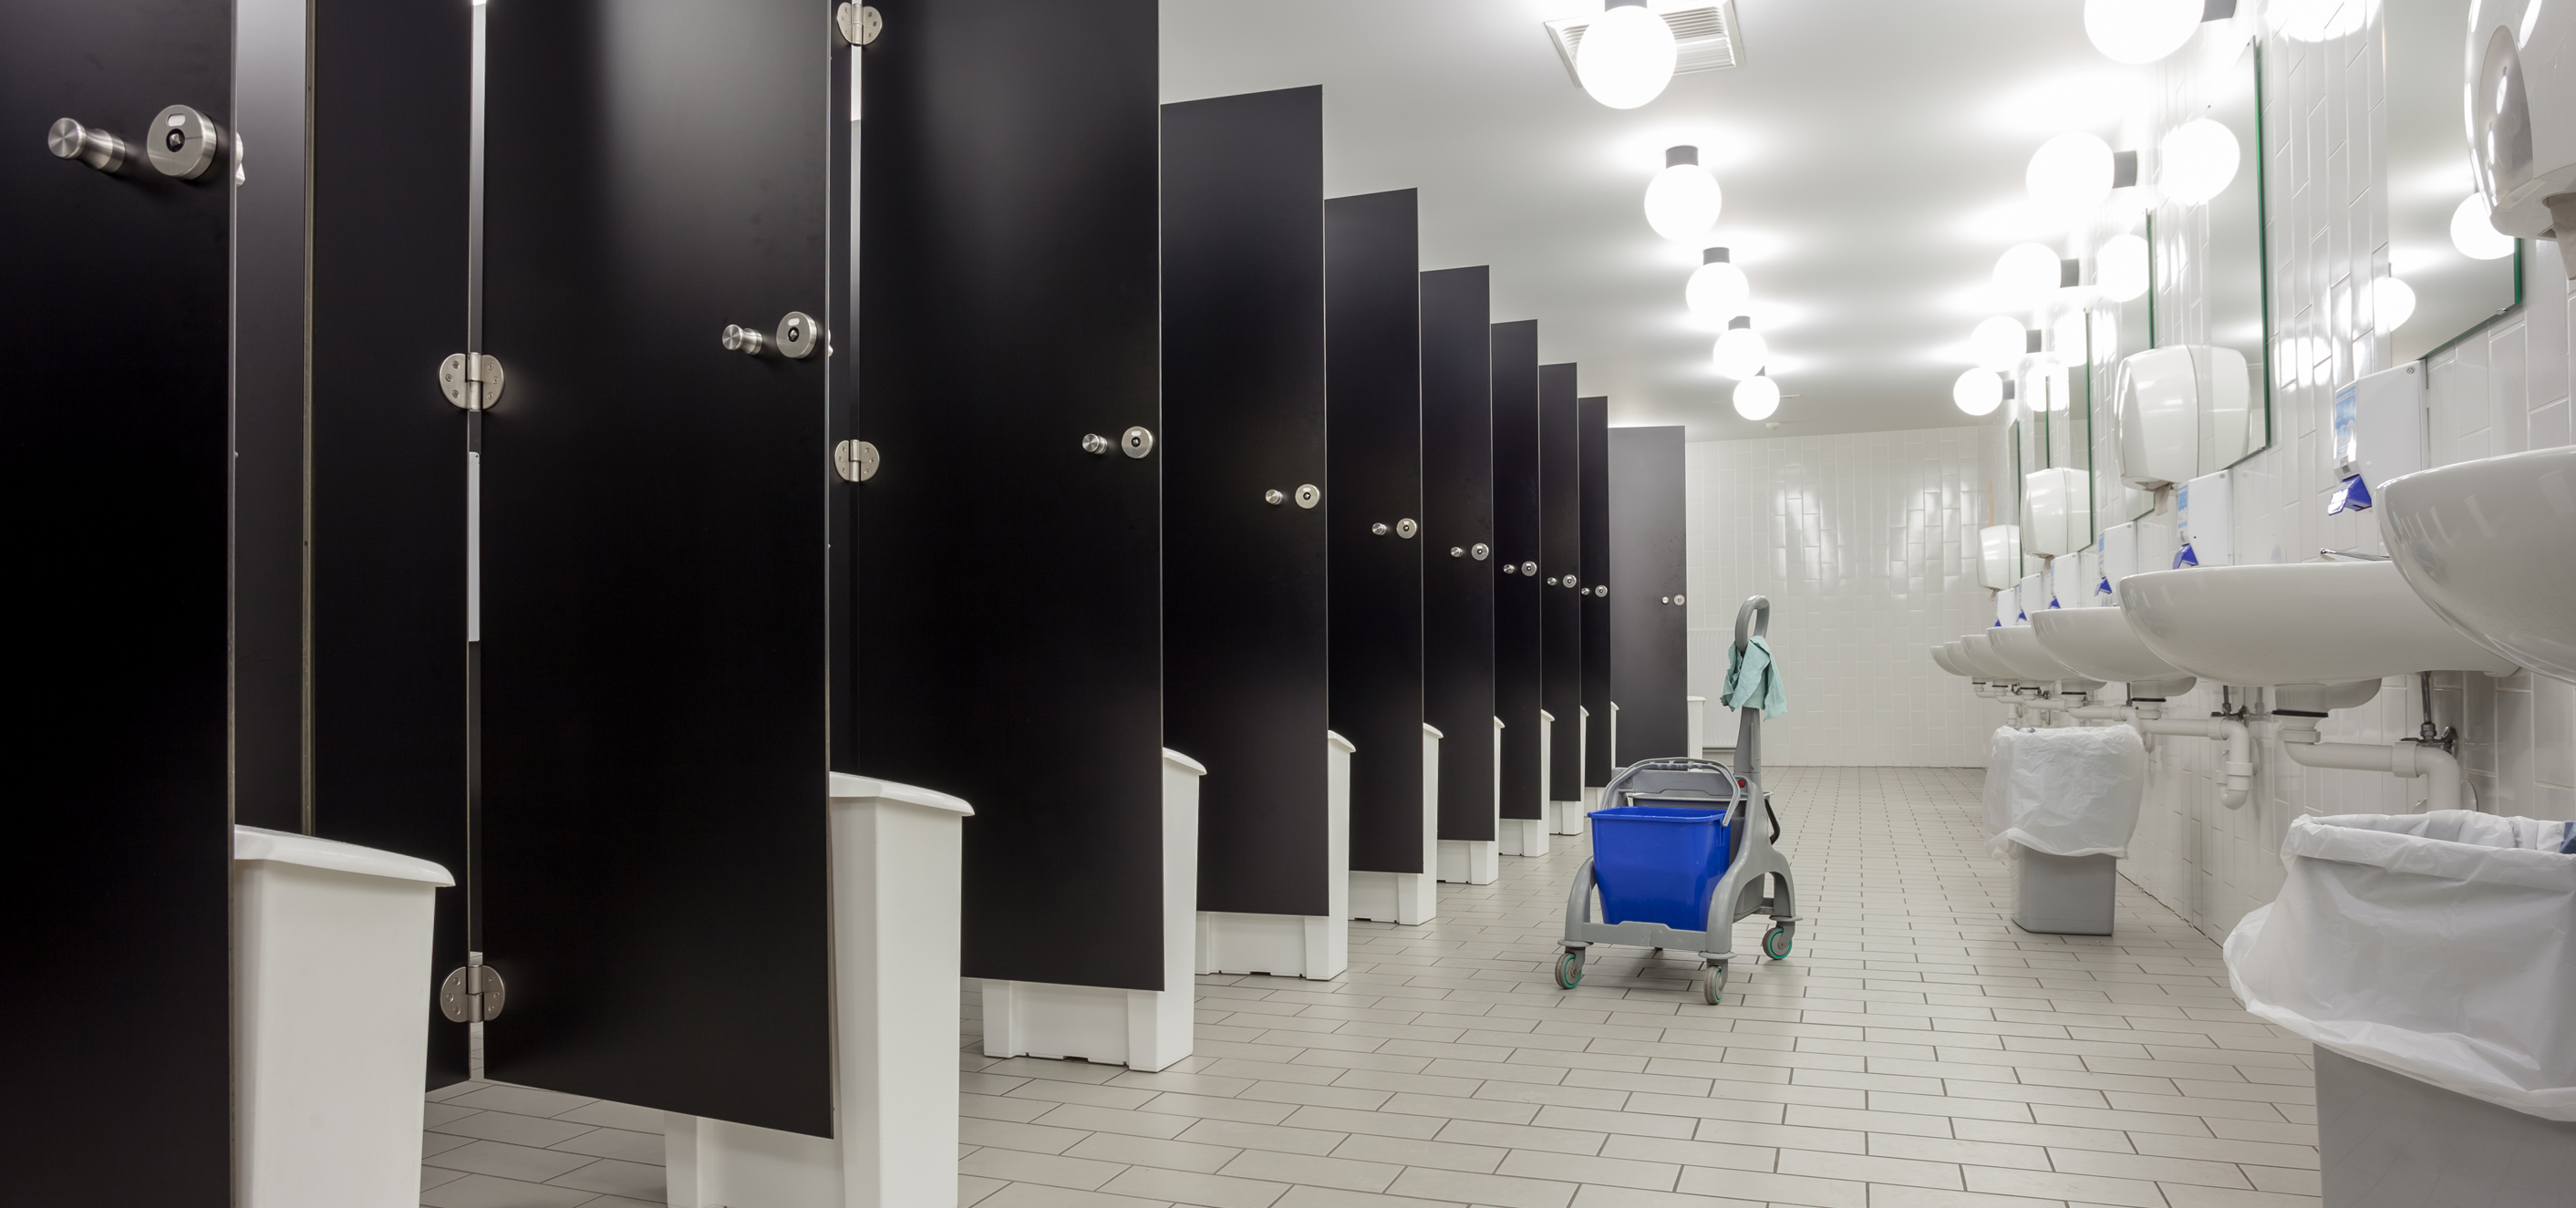 A perspective photo of a very long and very white bathroom with sinks and mirrors on one side, a severe number of globe lights overhead at equal intervals, and white tile on the floor in brick pattern with dark grout. Opposite the wall of sinks and mirrors are a long row of black toilet partitions. Every partition door is propped open by a white waste basket, creating a repeating effect. A single blue and grey mop bucket sits in between the two sides and offers the only spot of color in the room.